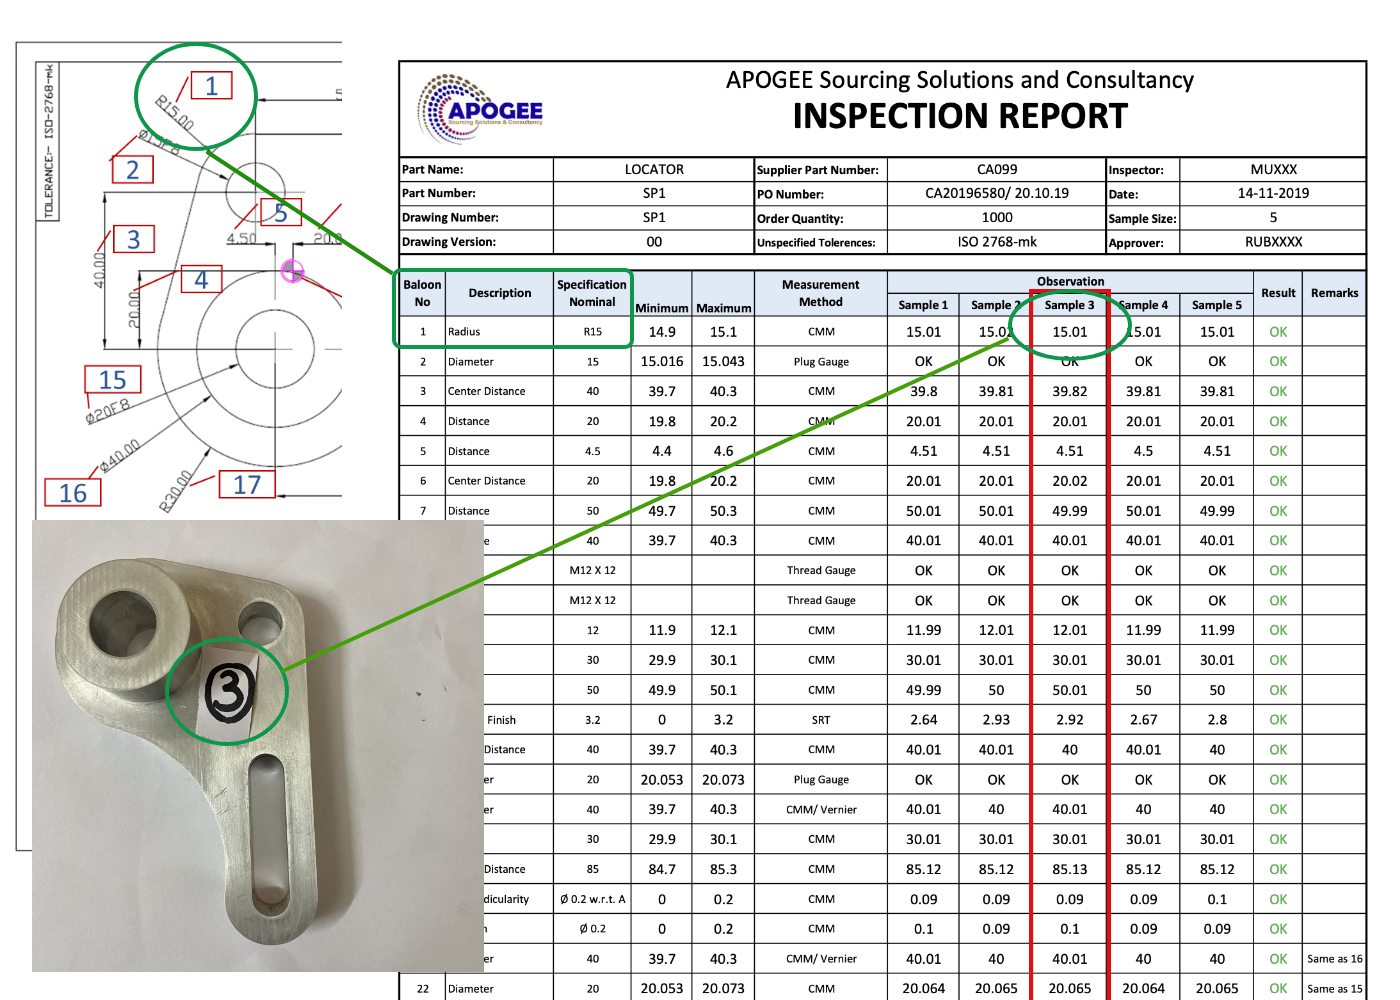 Matching Inspection Report with Ballooned Drawing